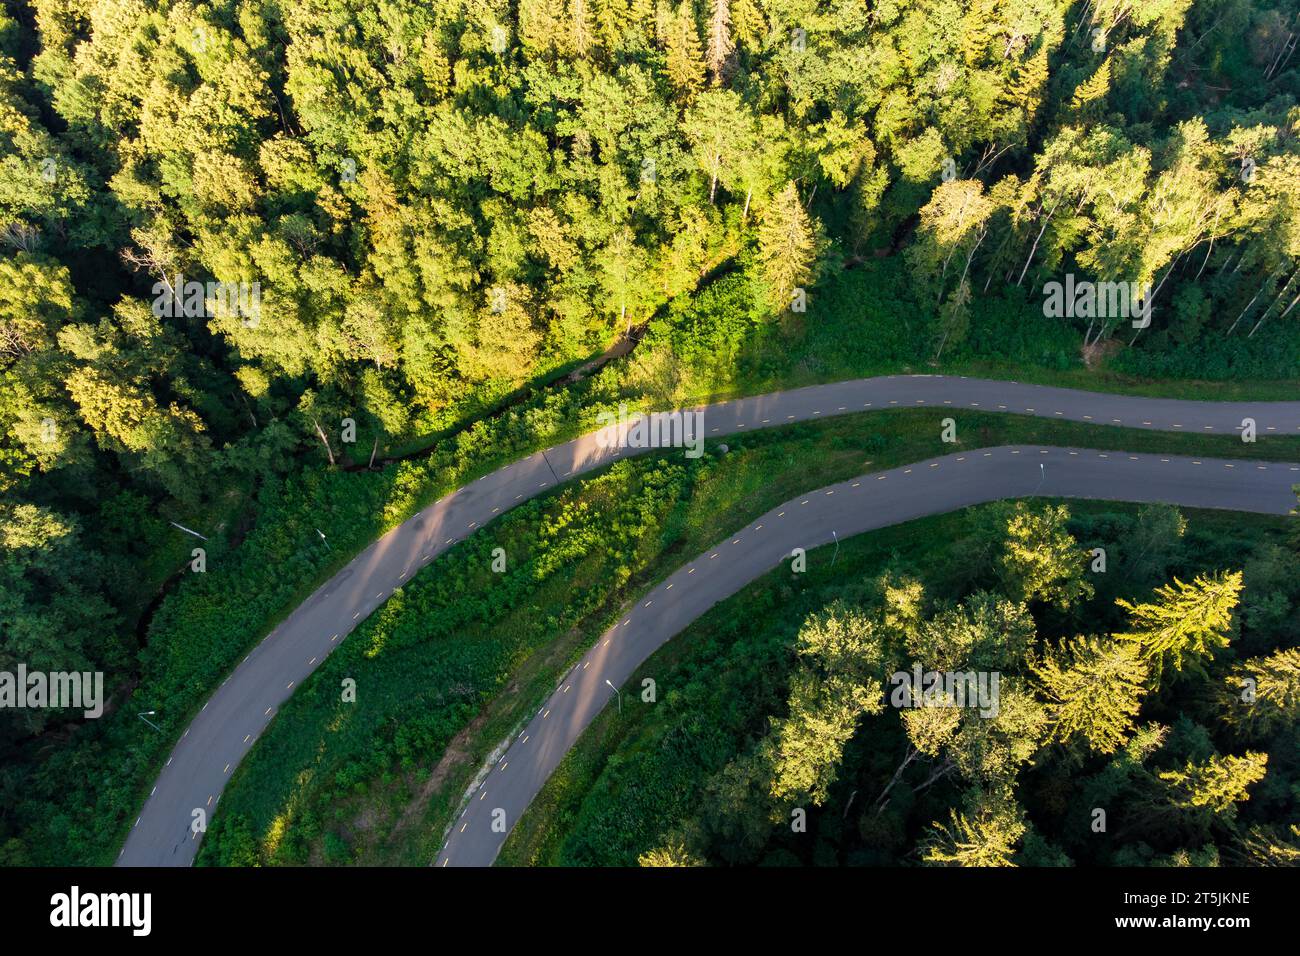 Asphalt road running through a forested area, aerial view. Roller ski track for training Stock Photo